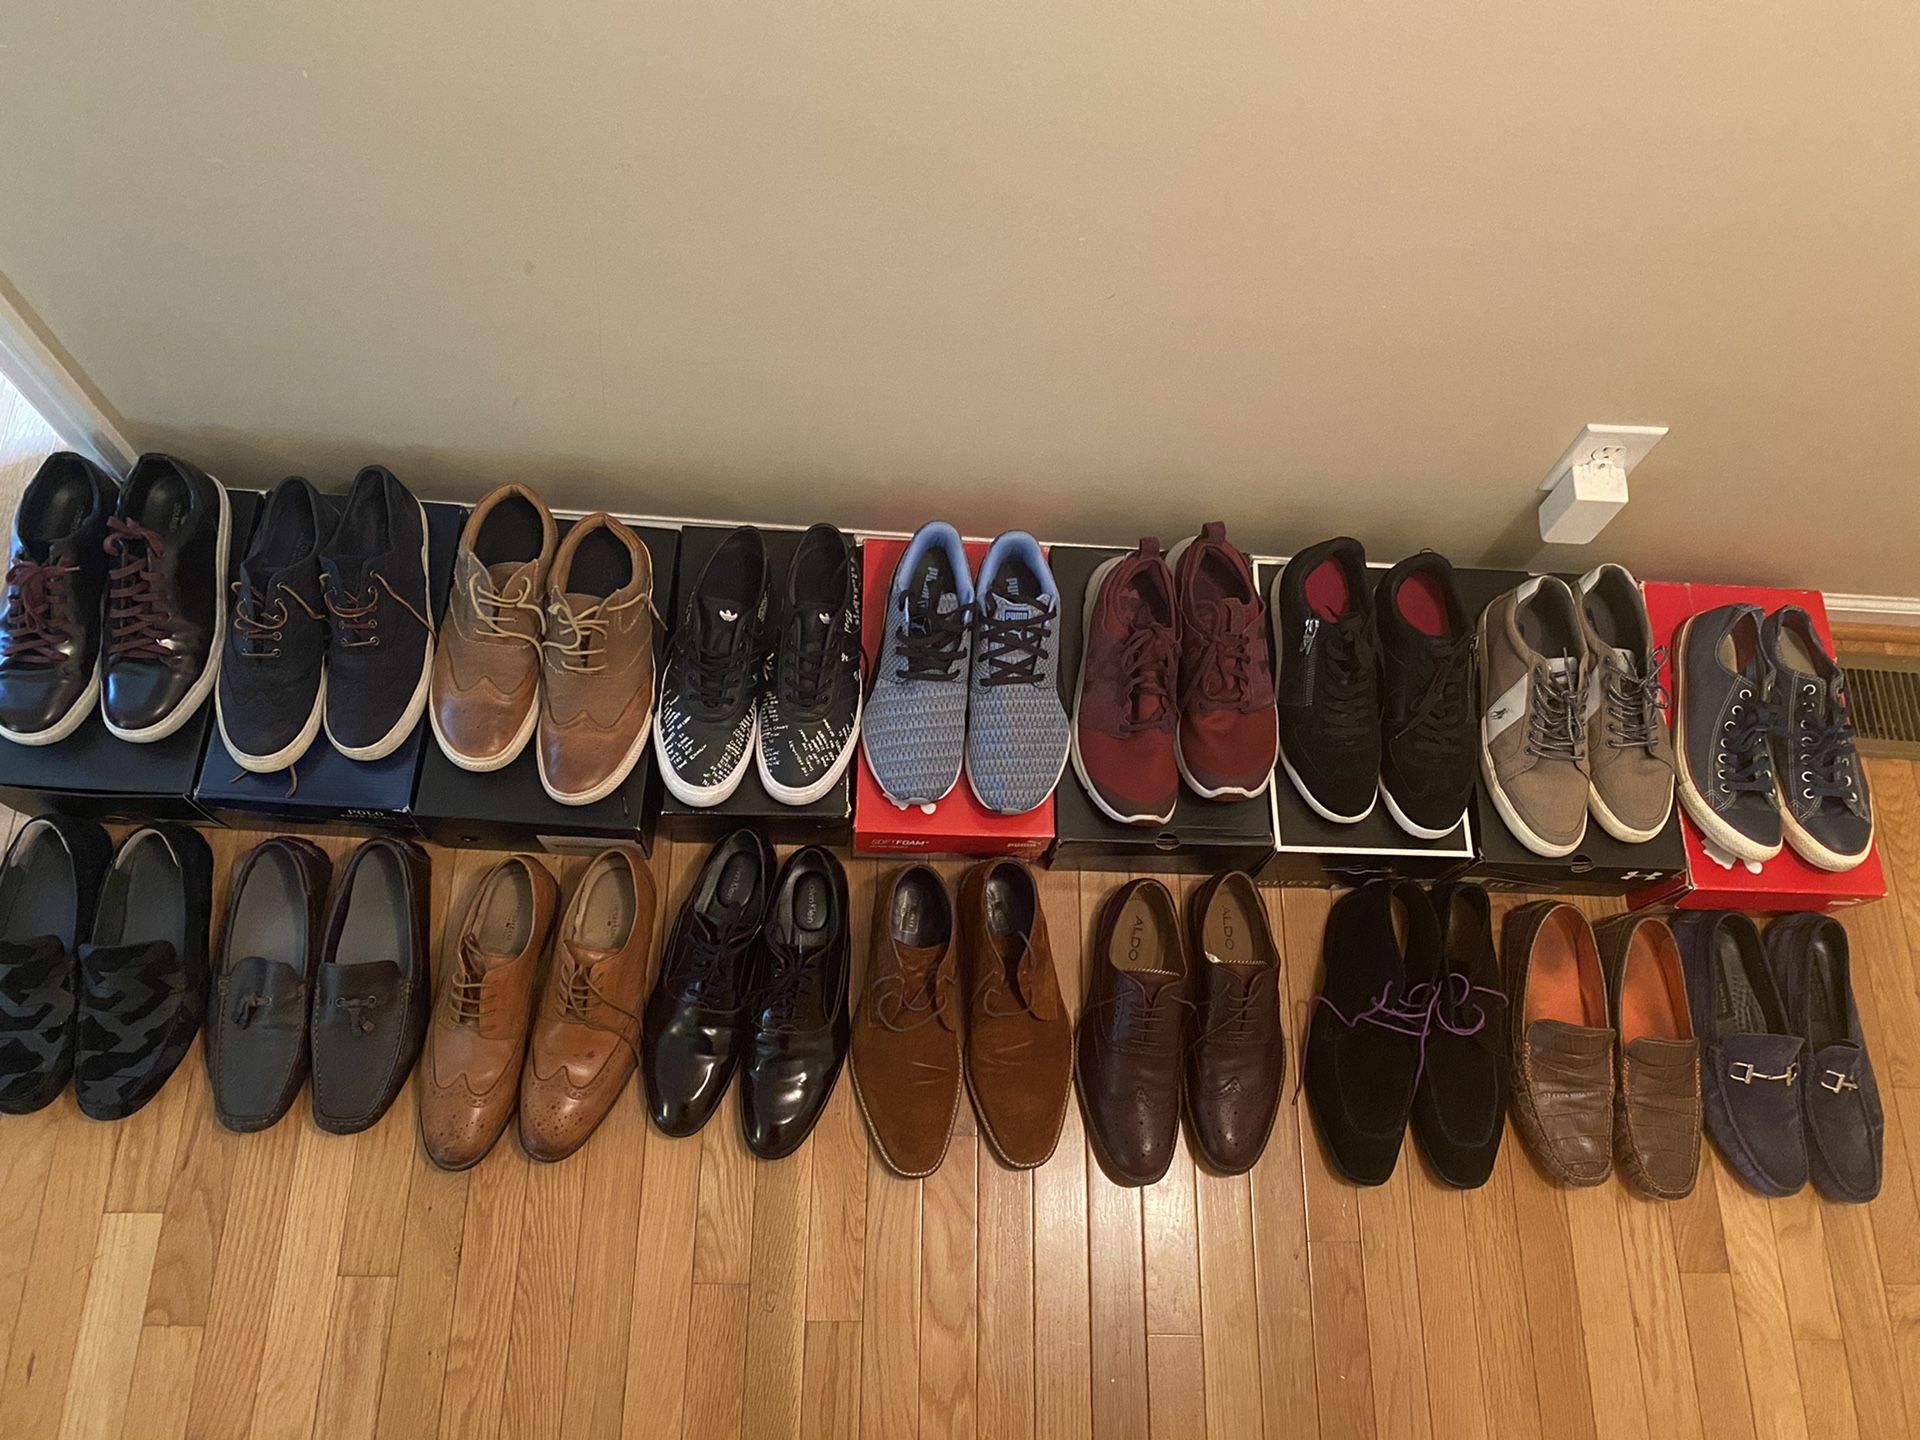 Men’s shoes (sneakers and dress shoes) - sizes 11 and 11.5, any 3 pairs for $50